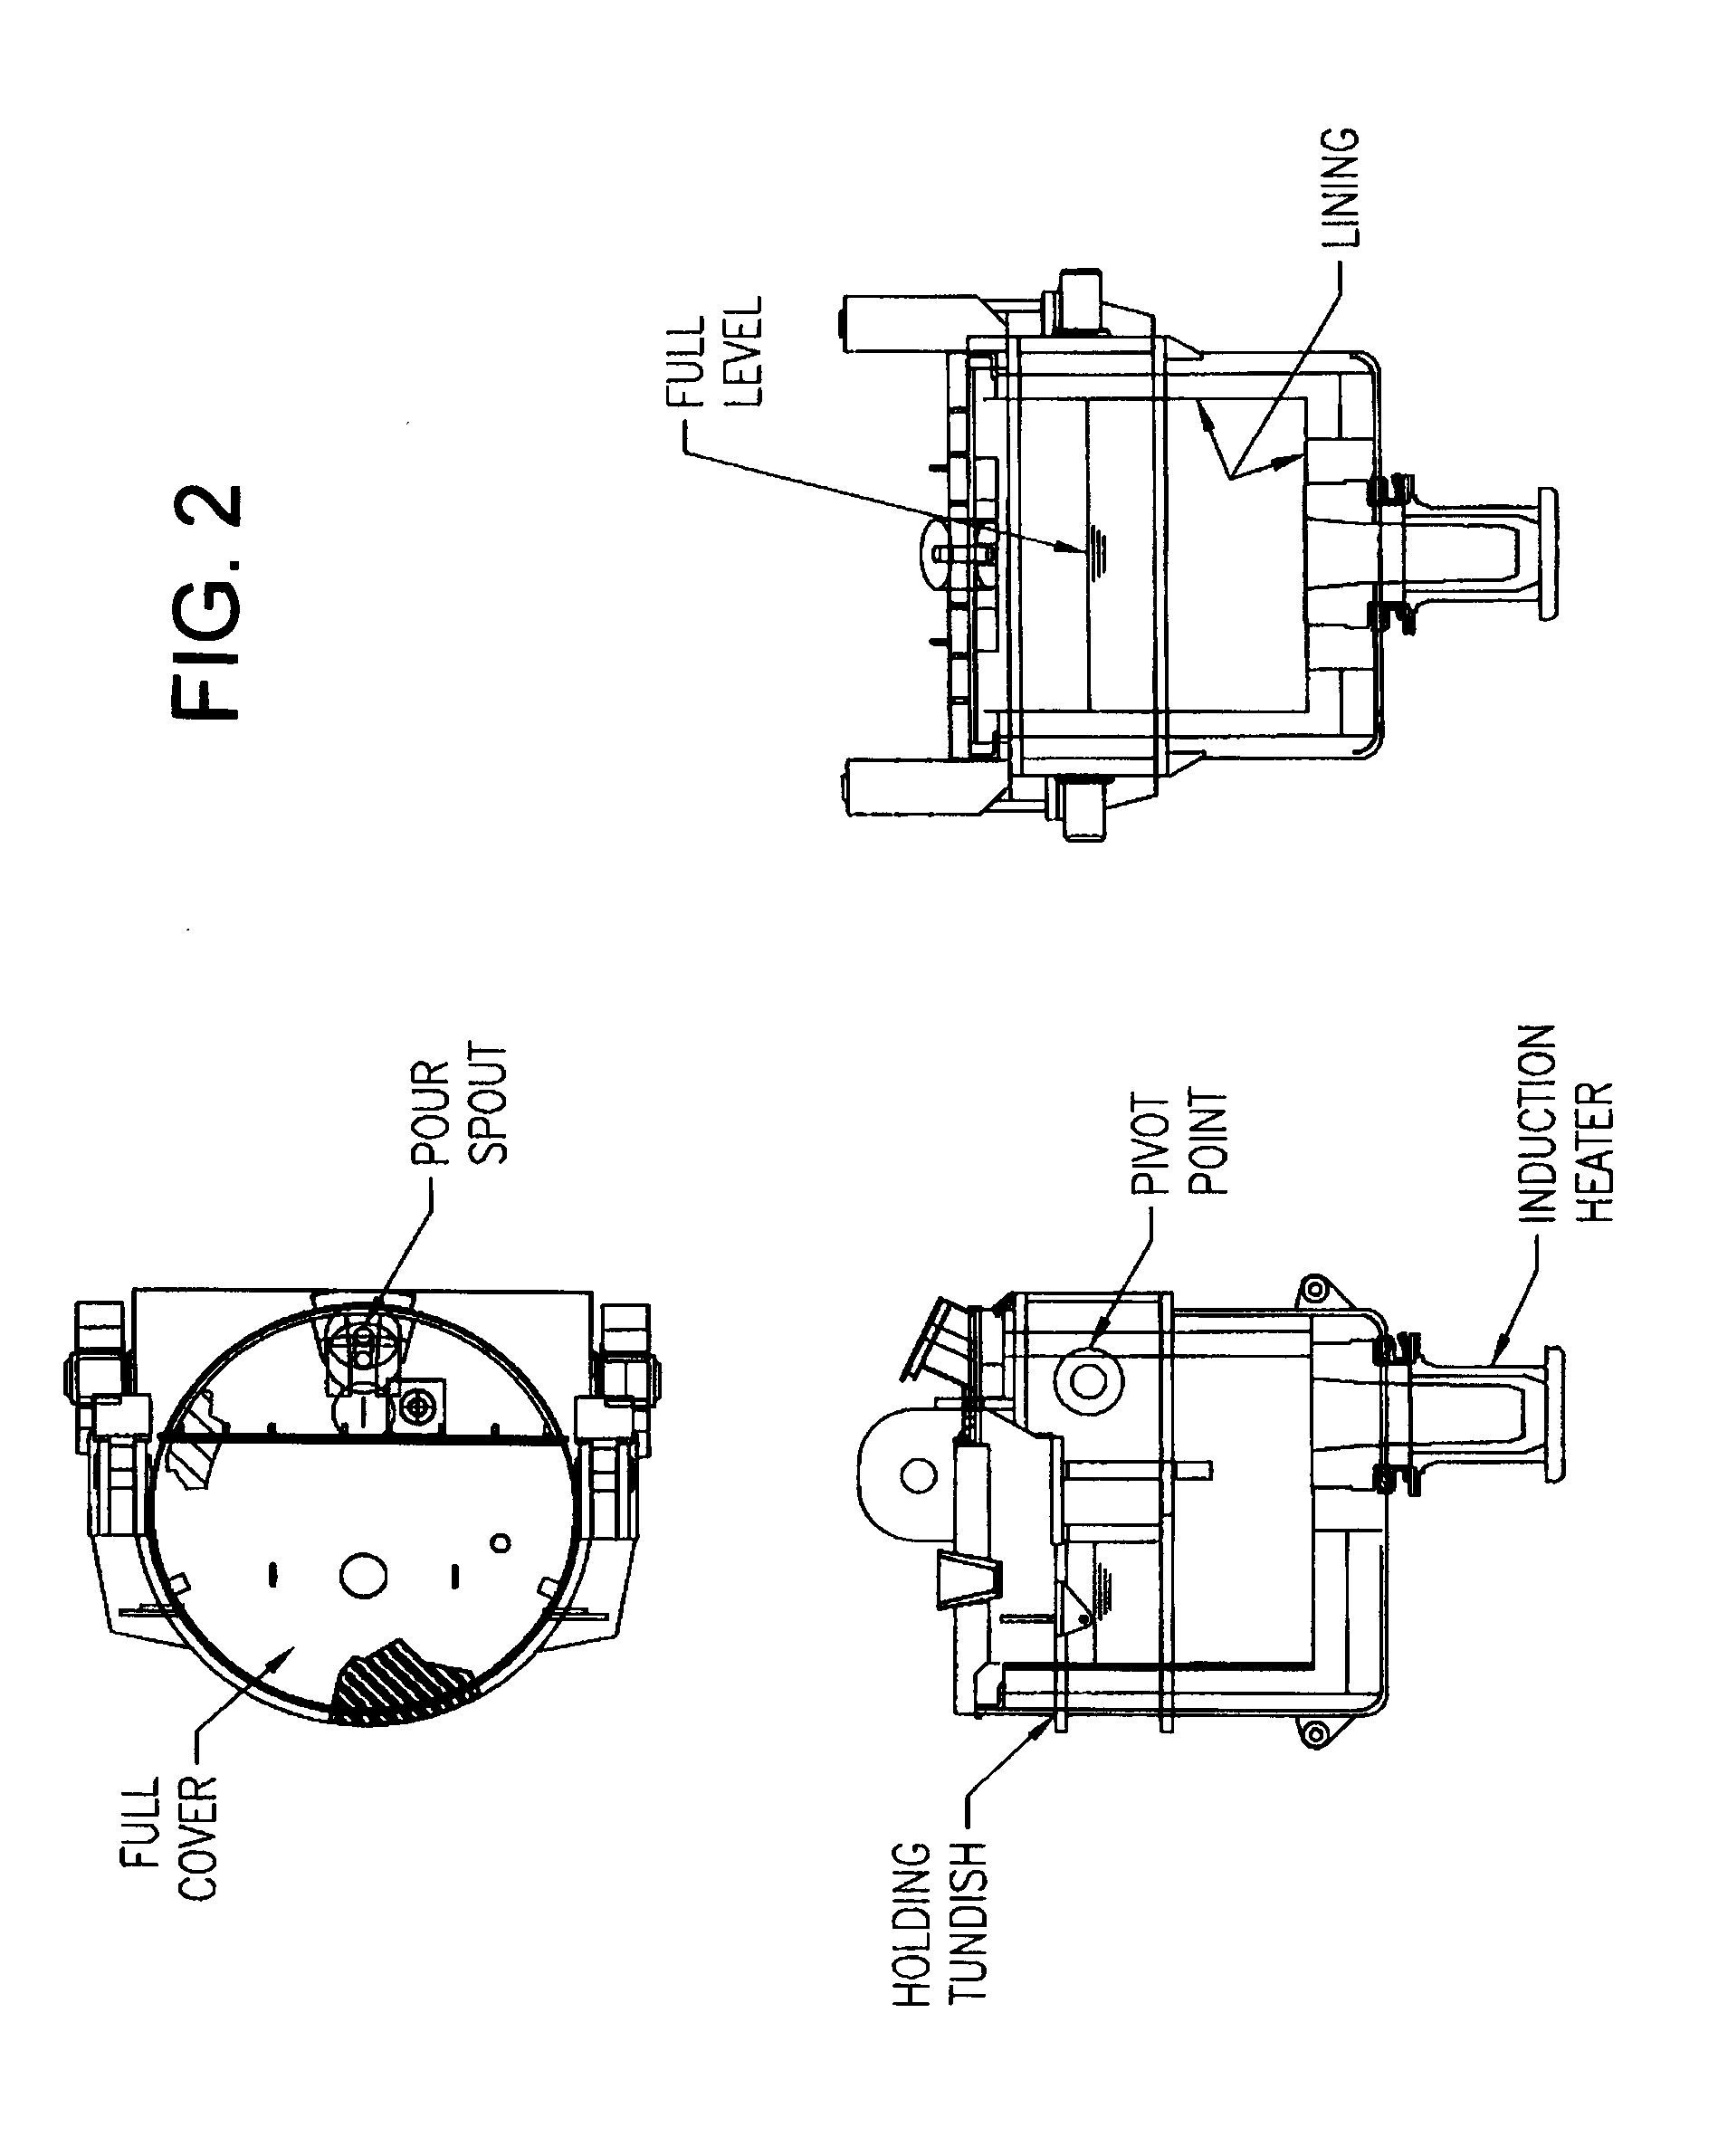 Method and apparatus for manufacturing metal bars or ingots